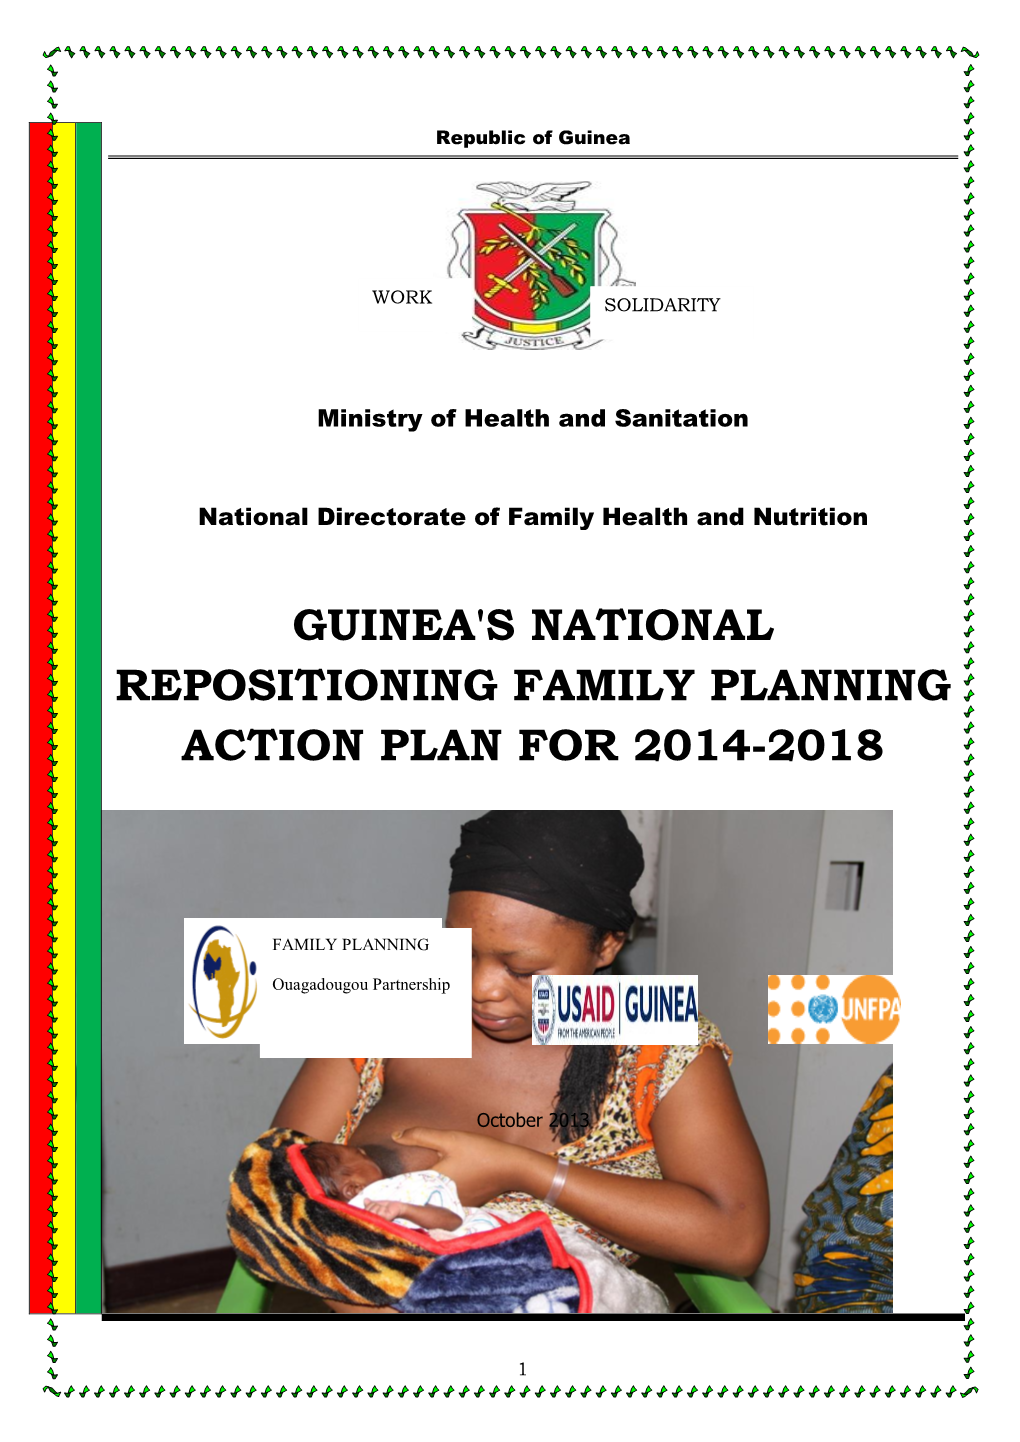 Guinea's National Repositioning Family Planning Action Plan for 2014-2018